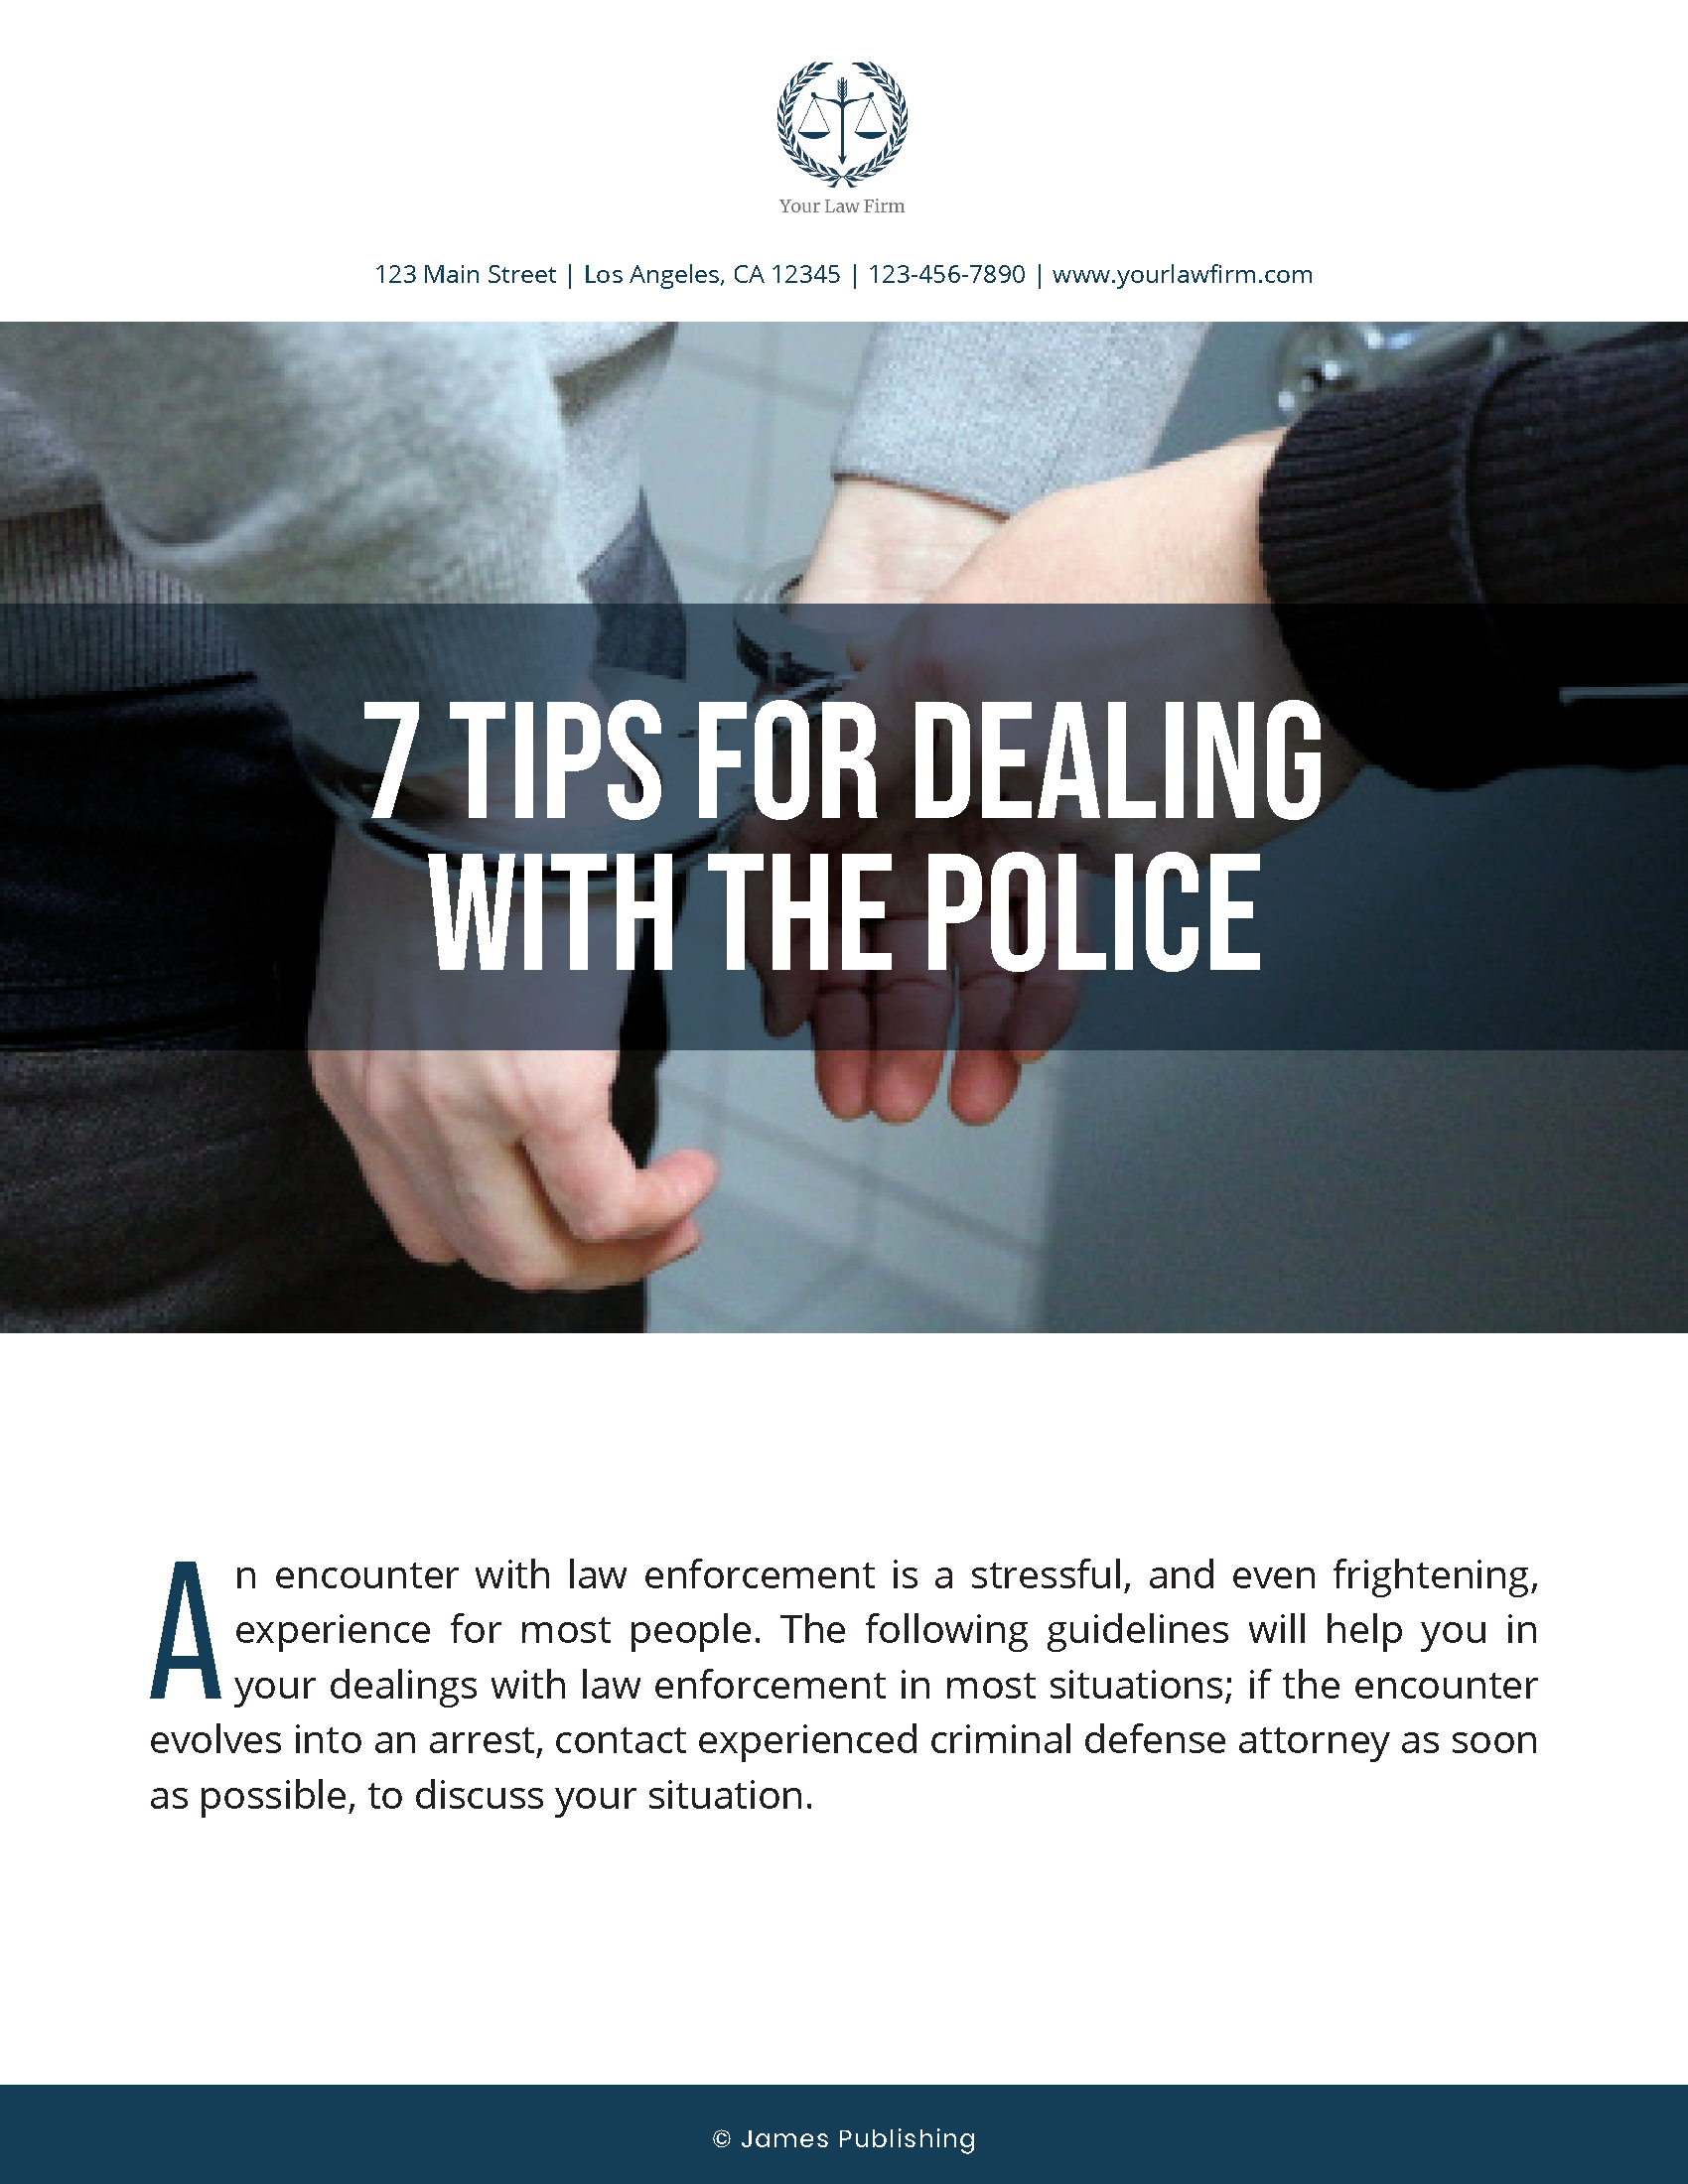 CRIM-10 7 Tips for Dealing with the Police